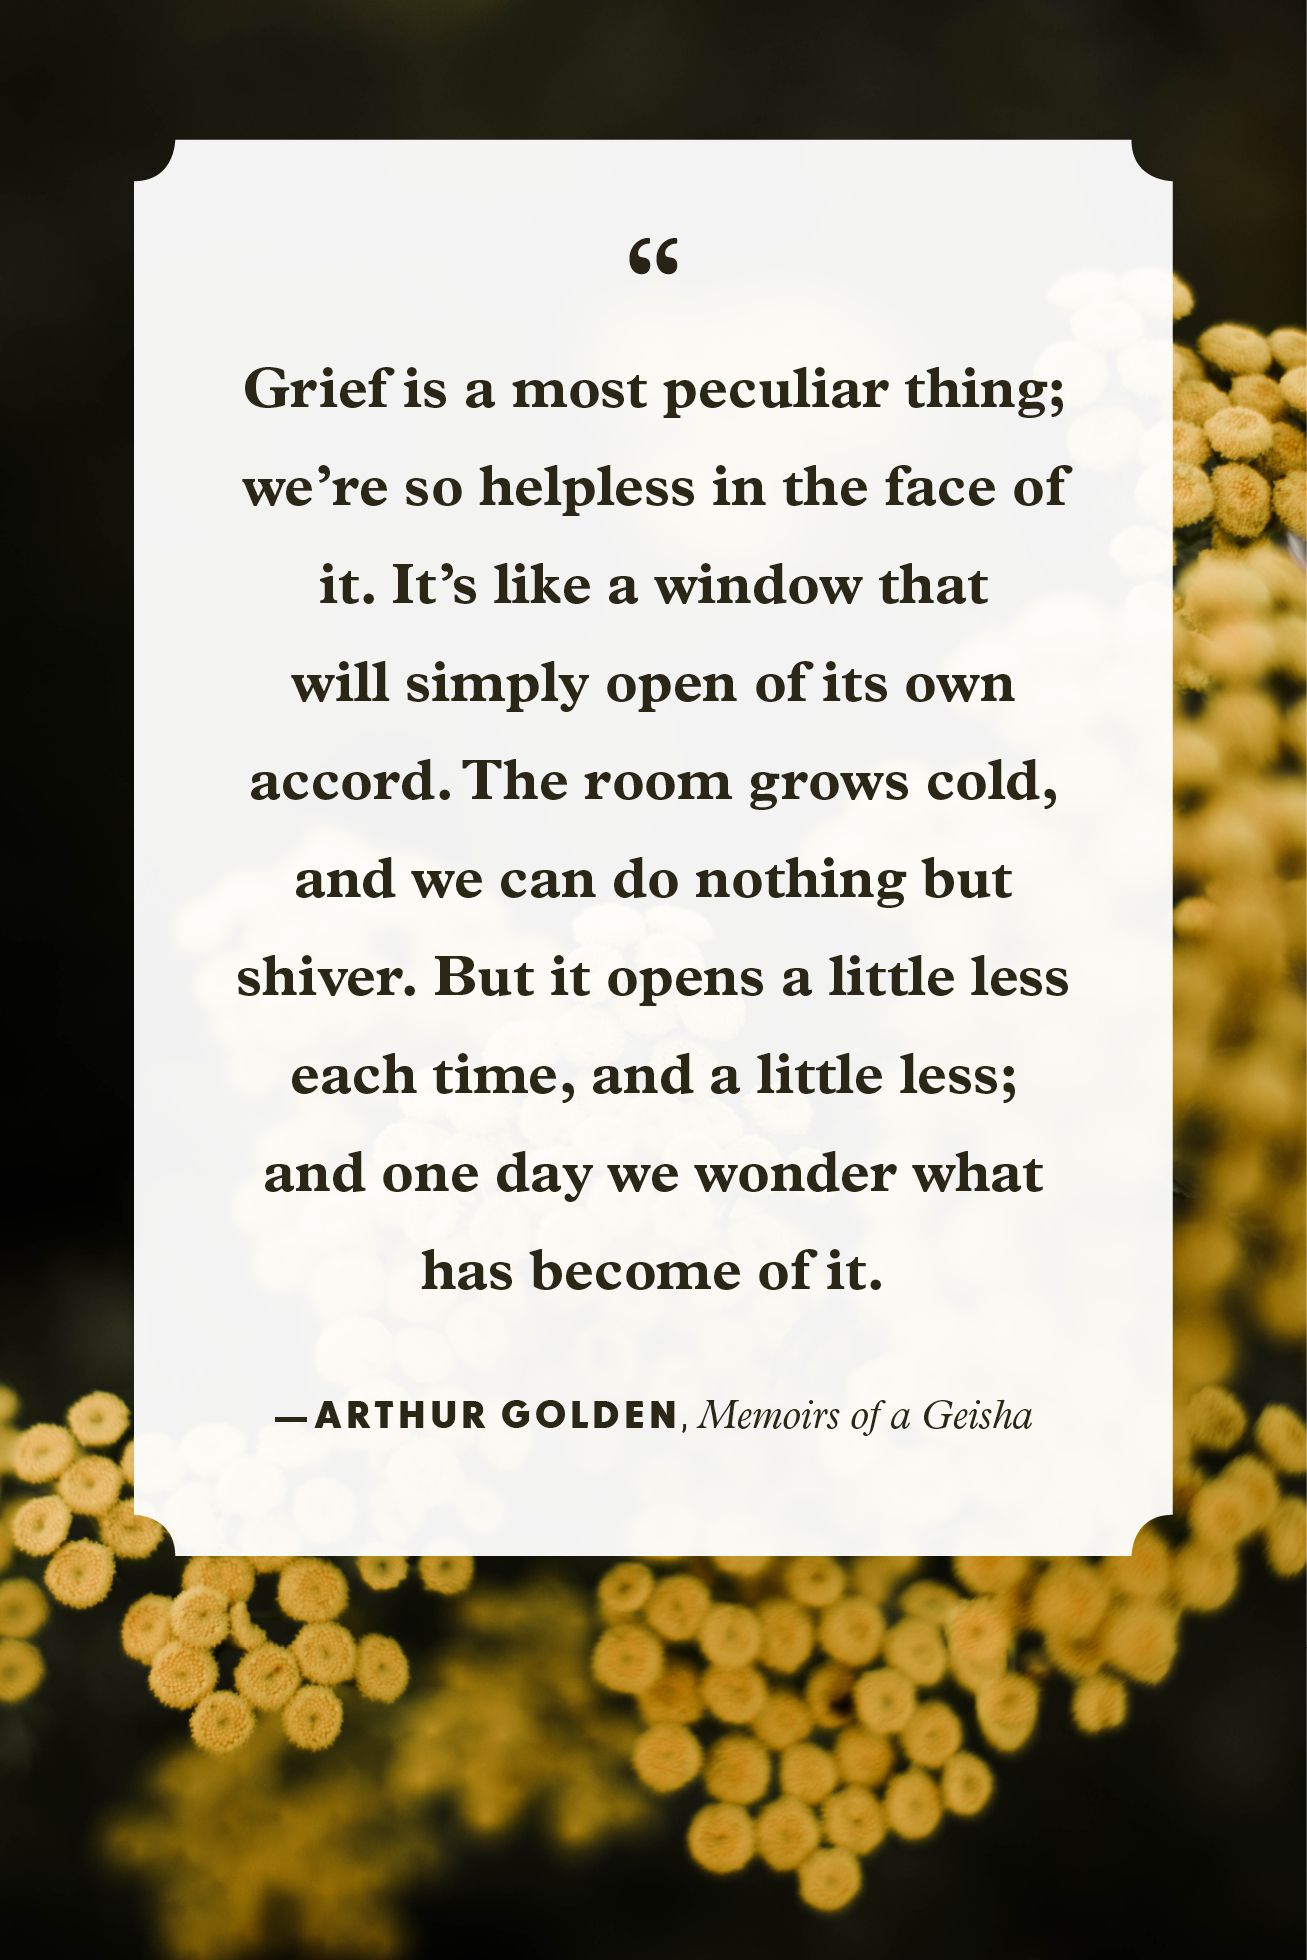 20 Best Grief Quotes - Inspirational Quotes To Help With Grief